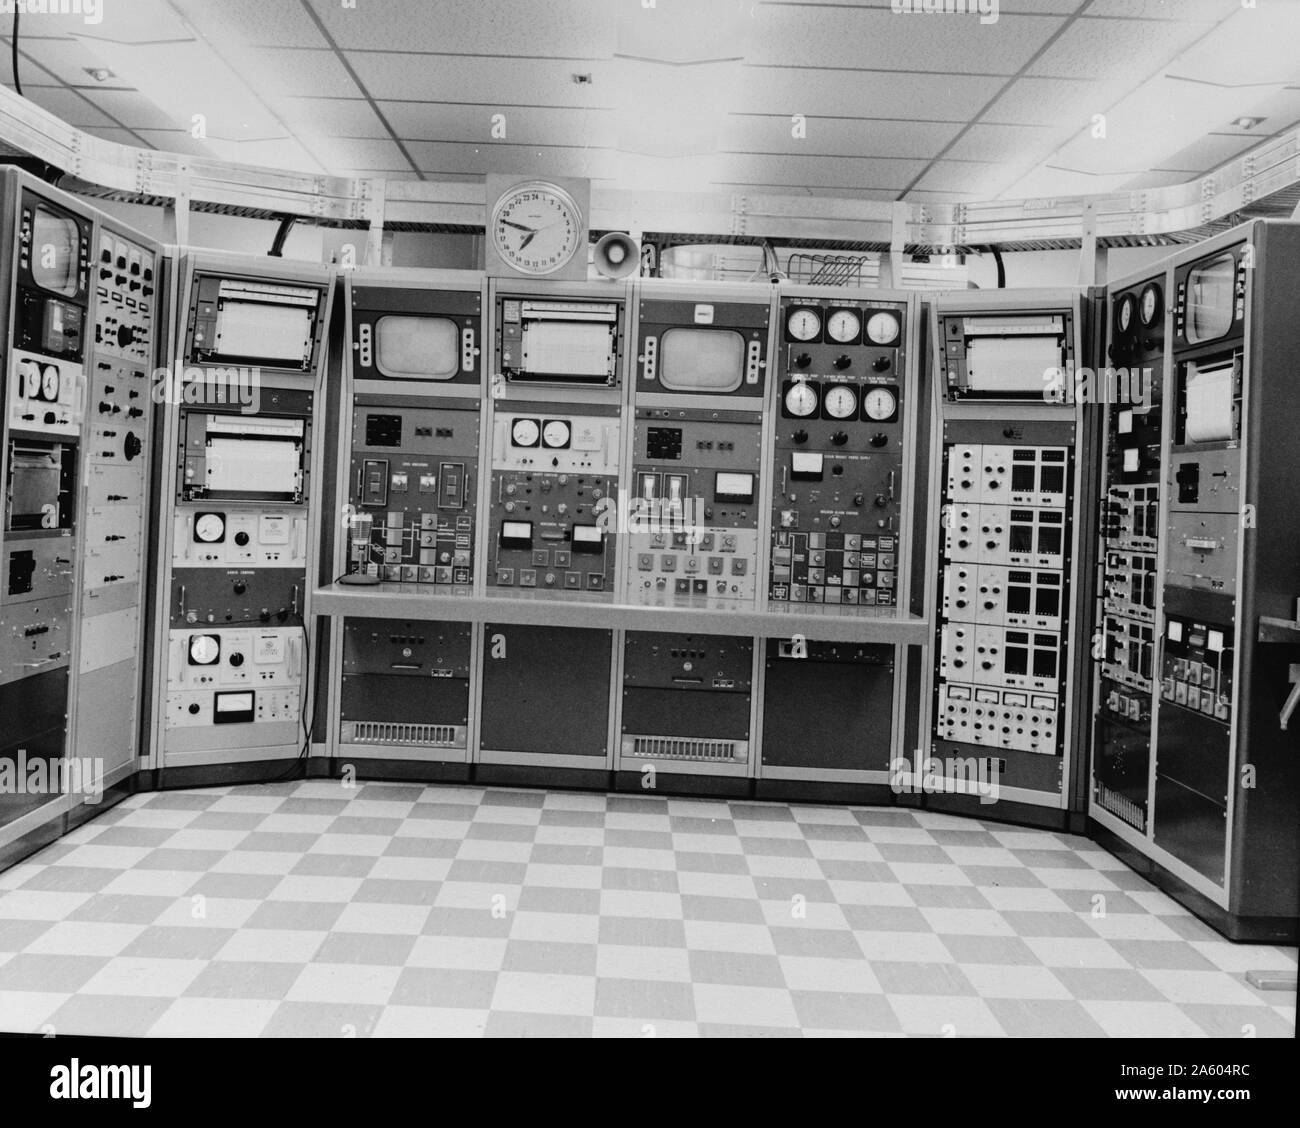 Rocky Flats Plant, Critical Mass Laboratory. Experimental control panel for Uranium and plutonium experiments in the uS nuclear weapons programme. Stock Photo